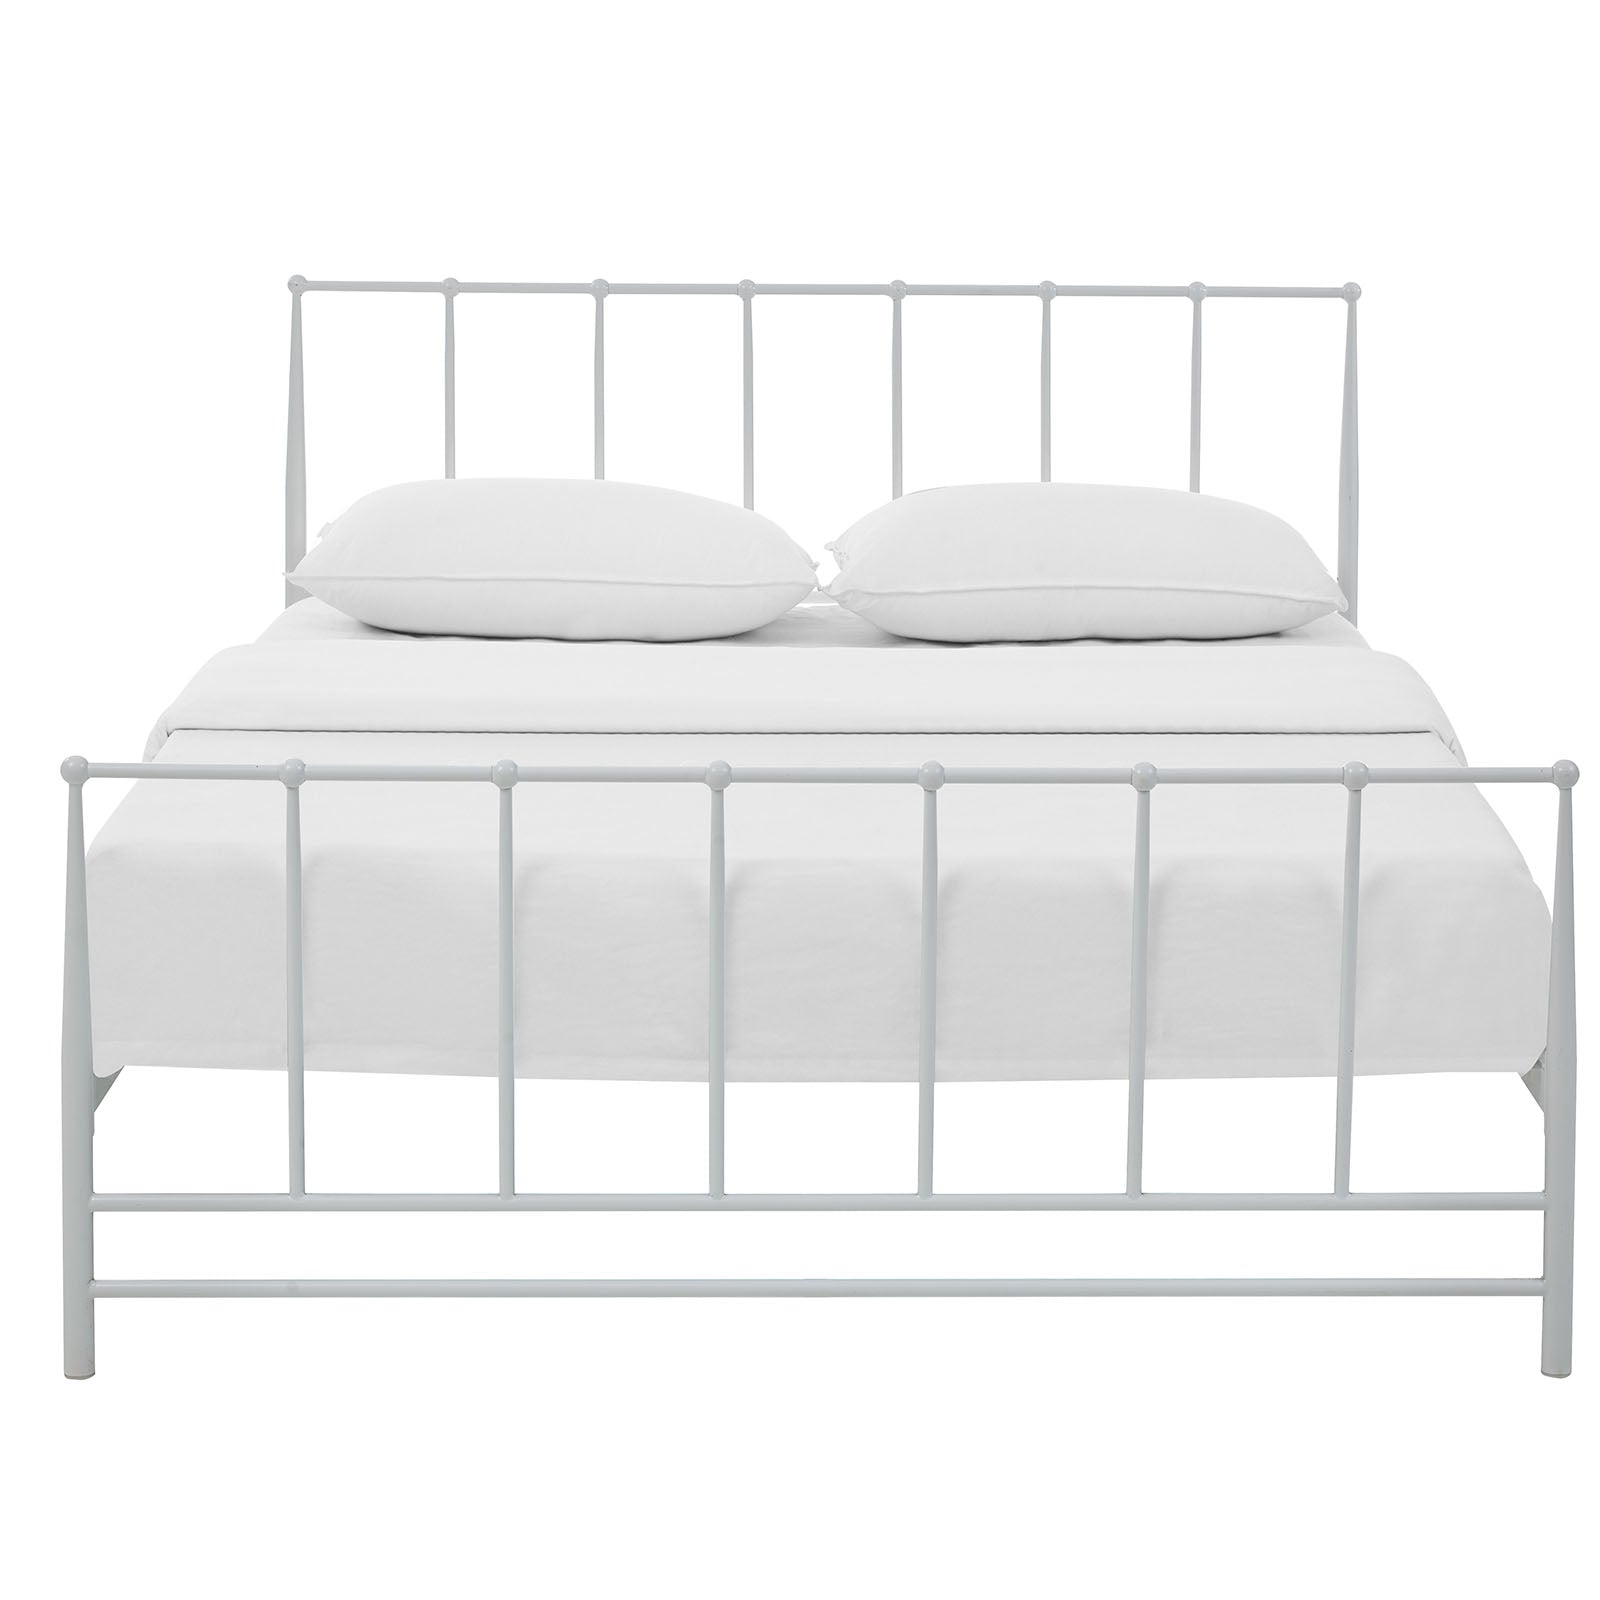 Modway Beds - Estate King Bed White